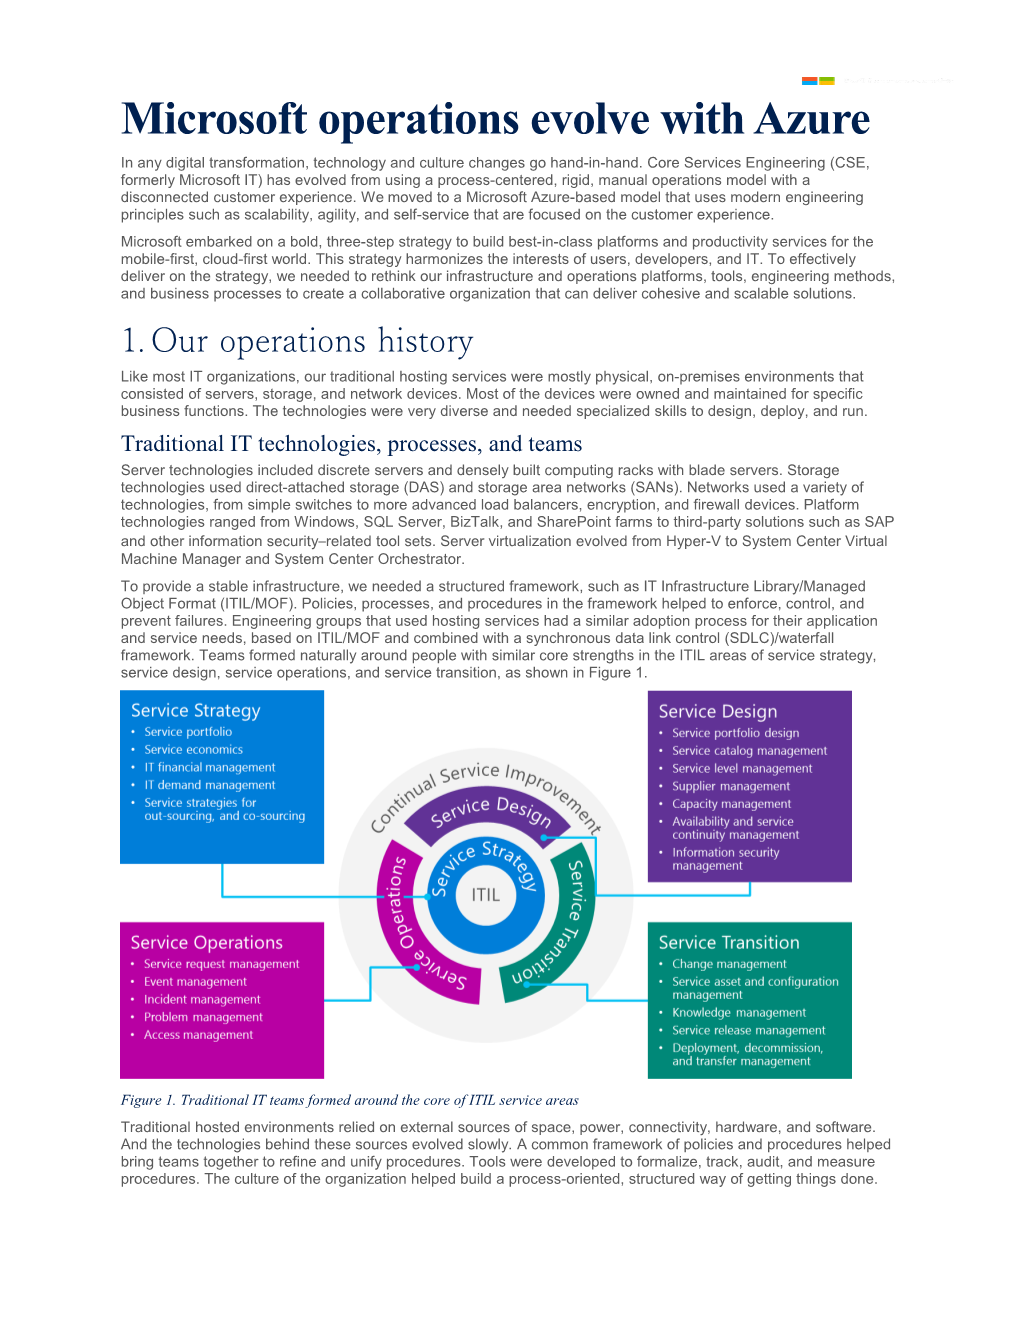 Microsoft Operations Evolve with Azure